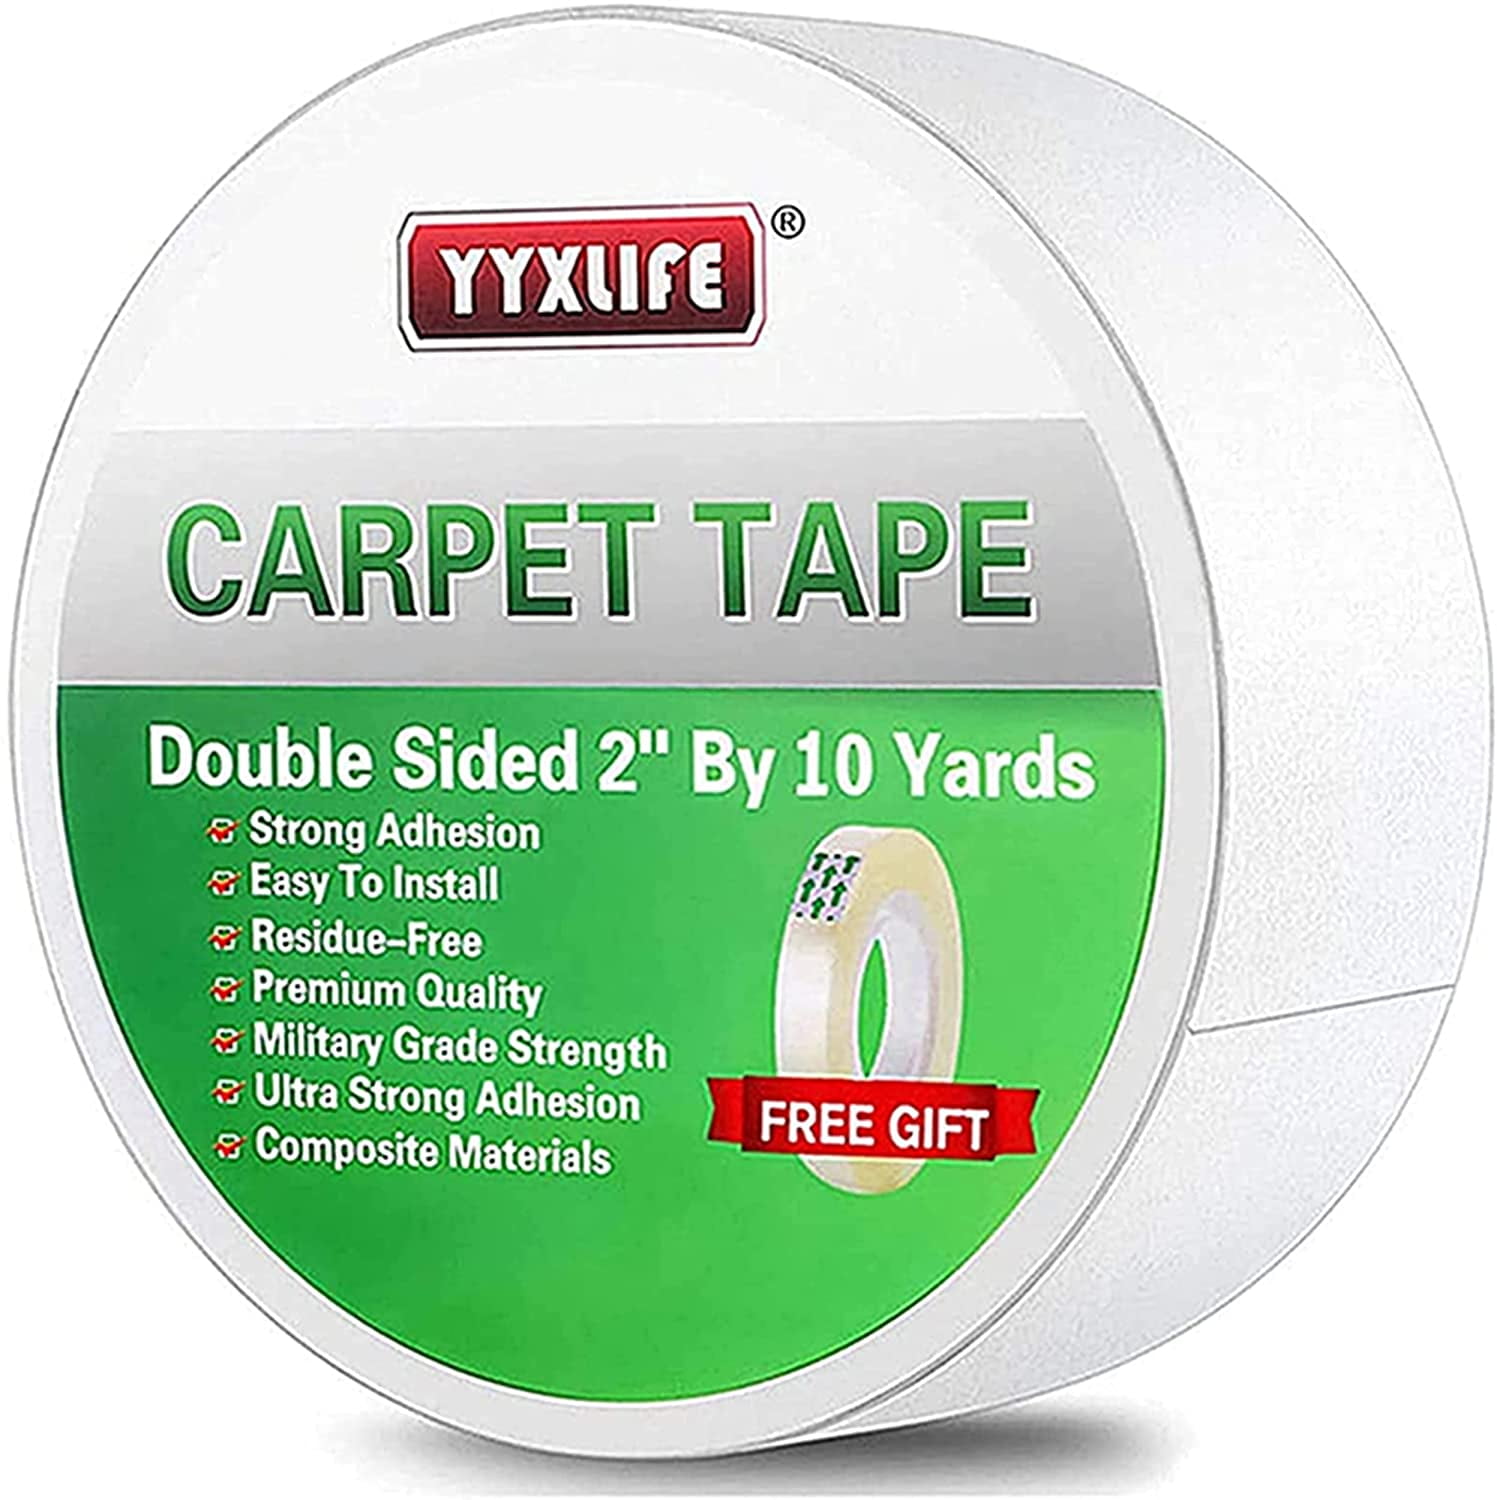 25 YARDS X 1.5 DOUBLE-SIDED CARPET TAPE